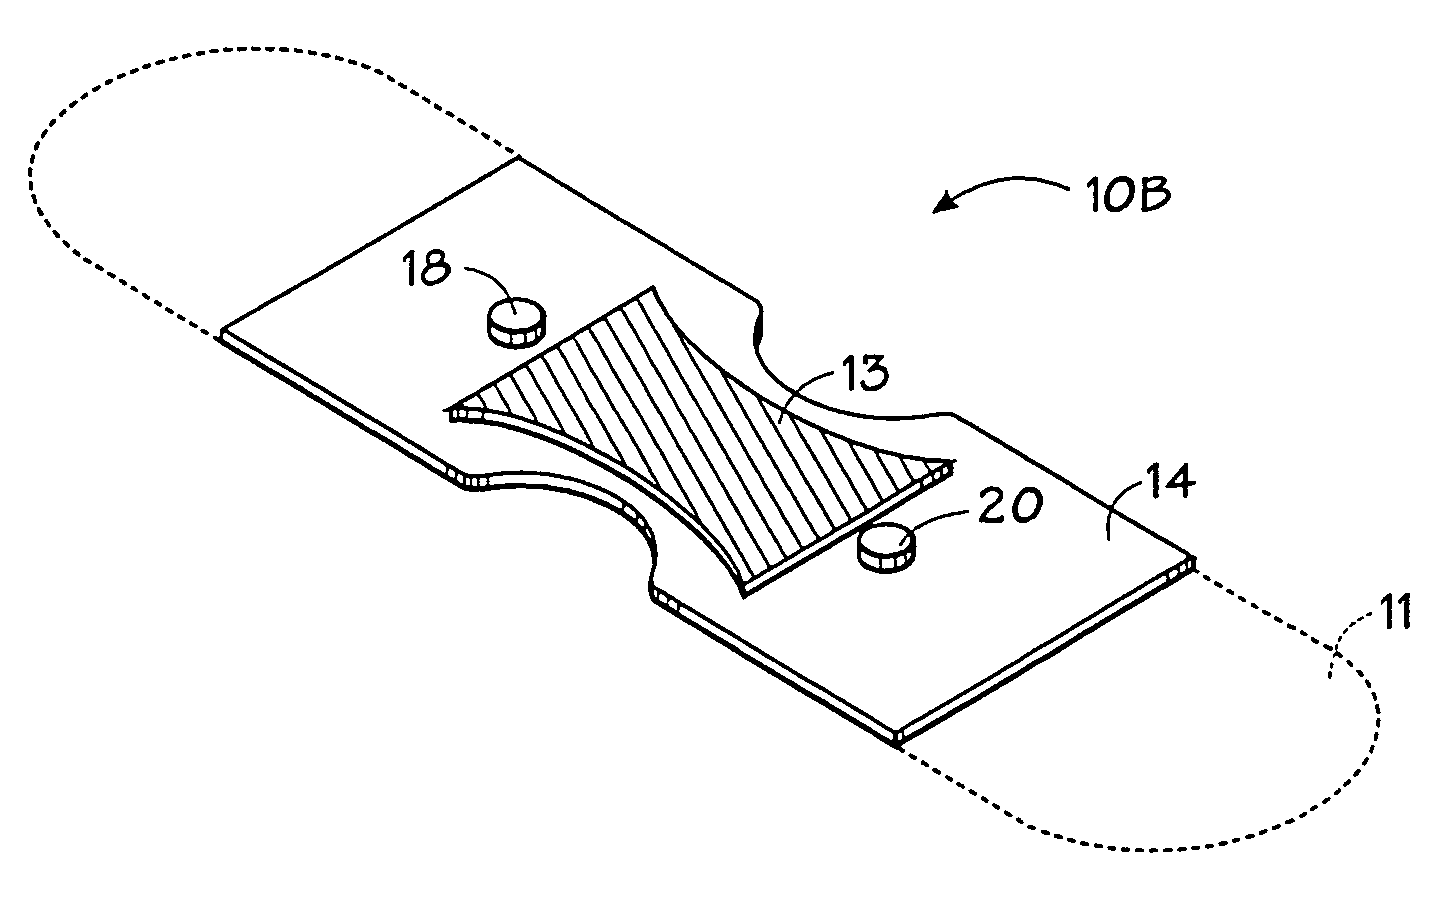 Opaque, electrically nonconductive region on a medical sensor